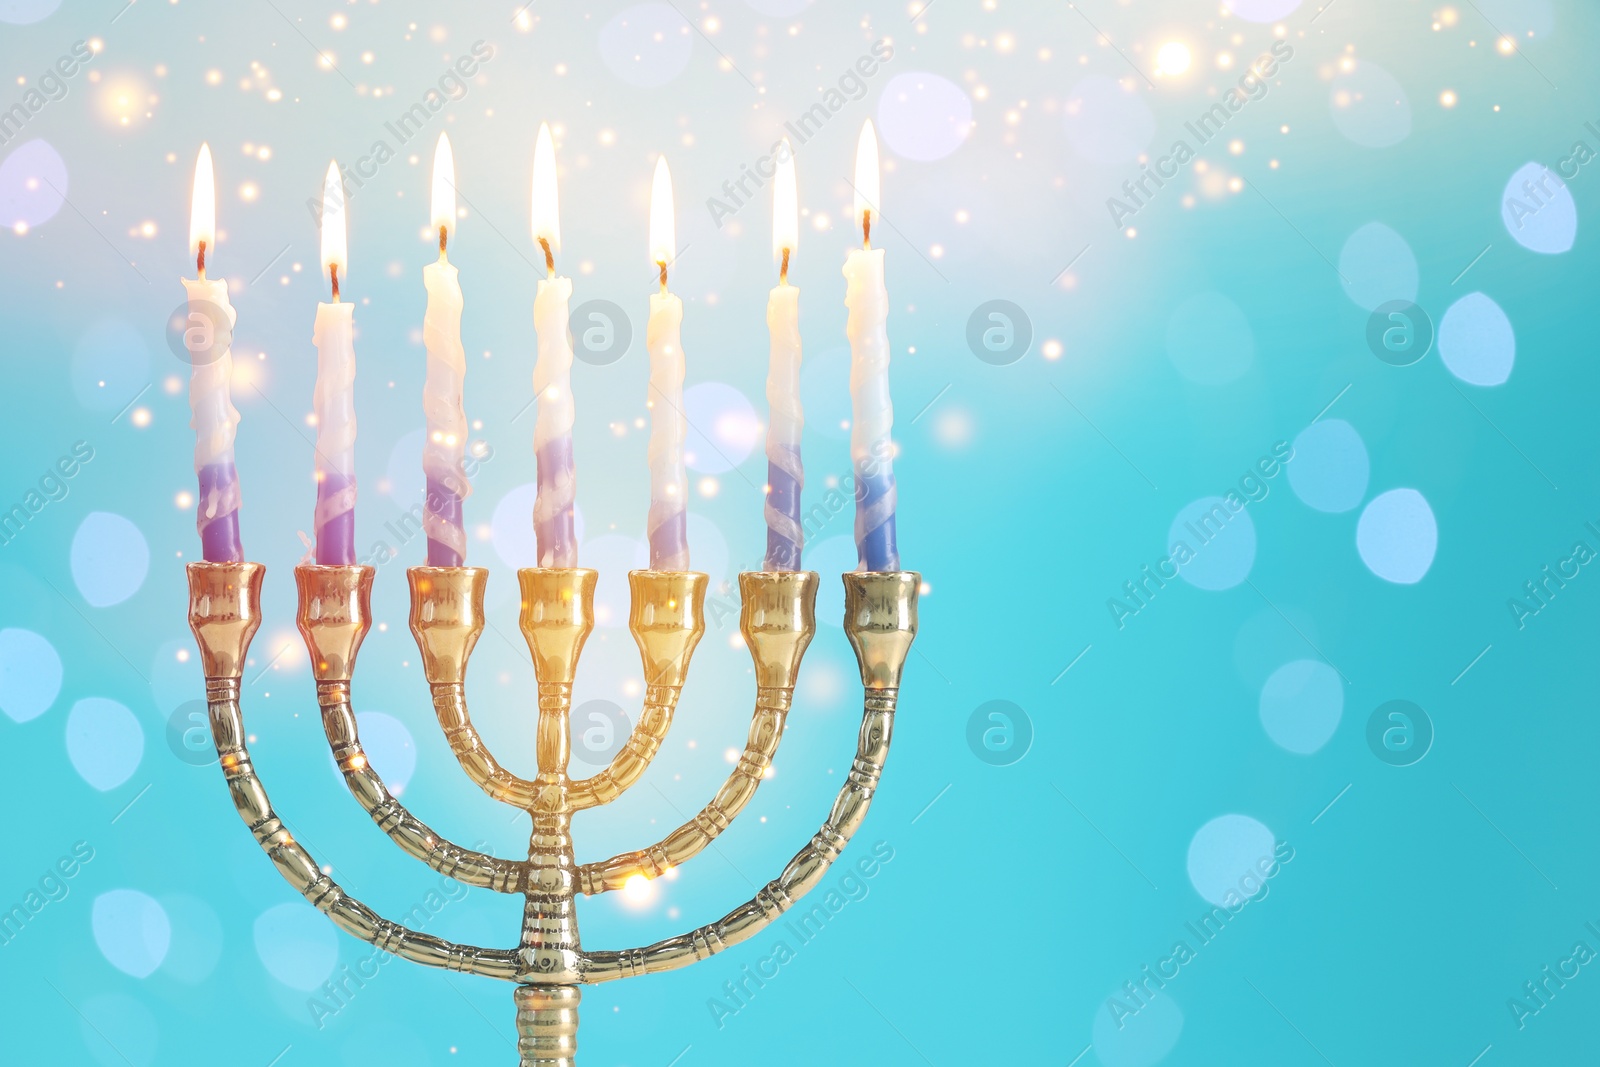 Image of Hanukkah celebration. Menorah with burning candles on light blue background with blurred lights, space for text